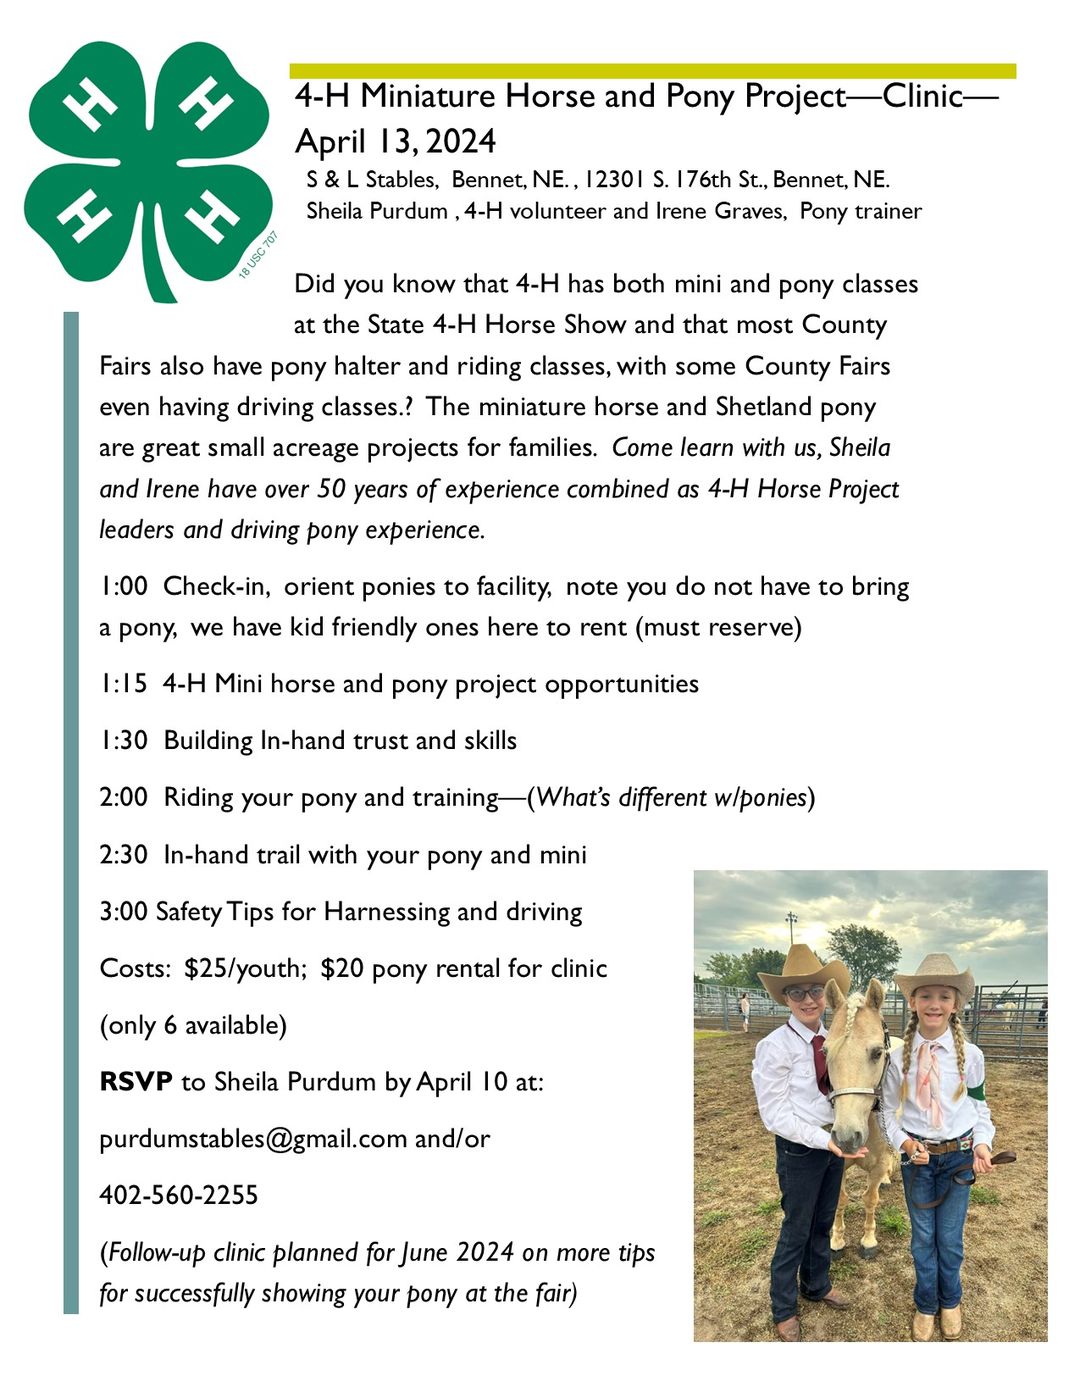 4-H Miniature Horse and Pony Project Clinic, April 13; Register by April 10